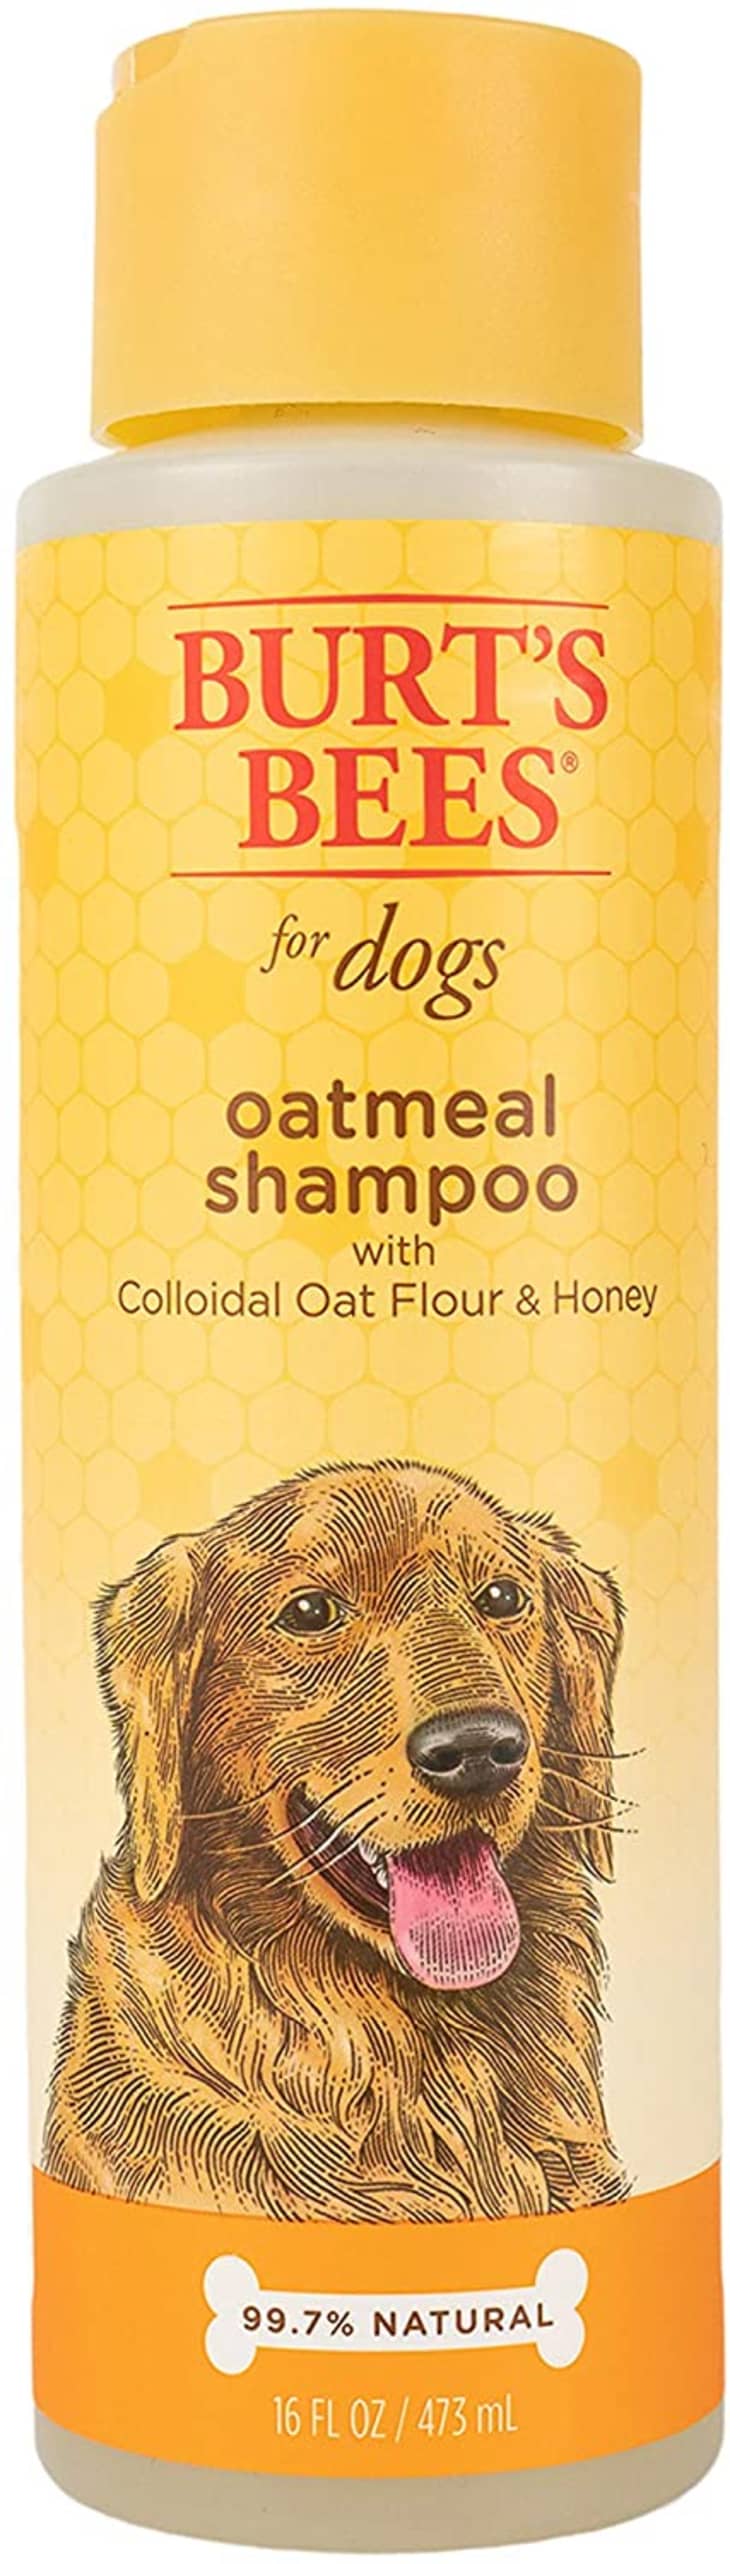 Product Image: Burt's Bees for Dogs Natural Oatmeal Shampoo